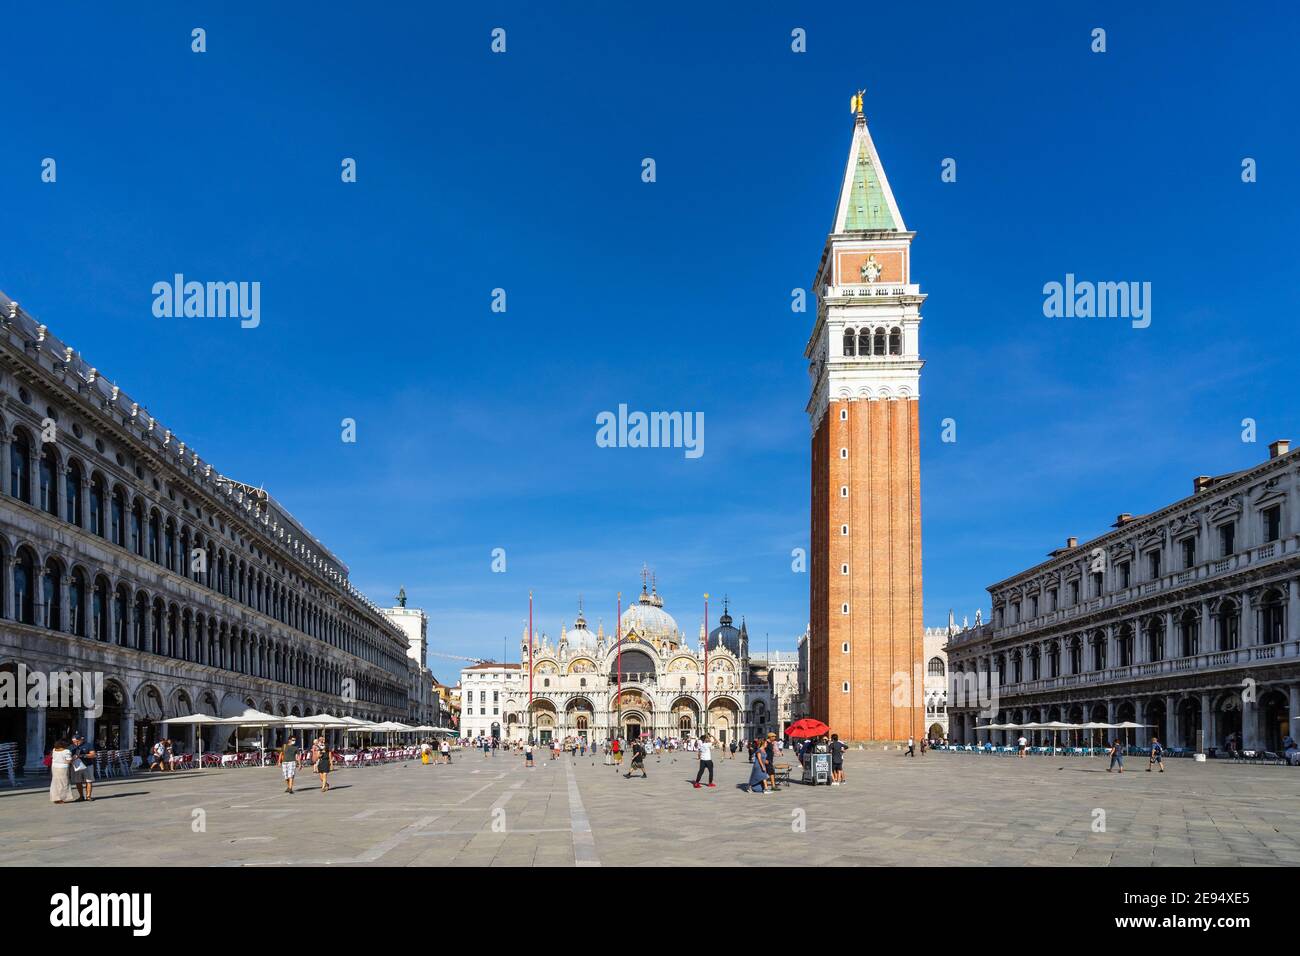 Venice, Italy, Sept. 11, 2020 – Wide view of St. Mark's Square and bell tower St Mark's Basilica Stock Photo